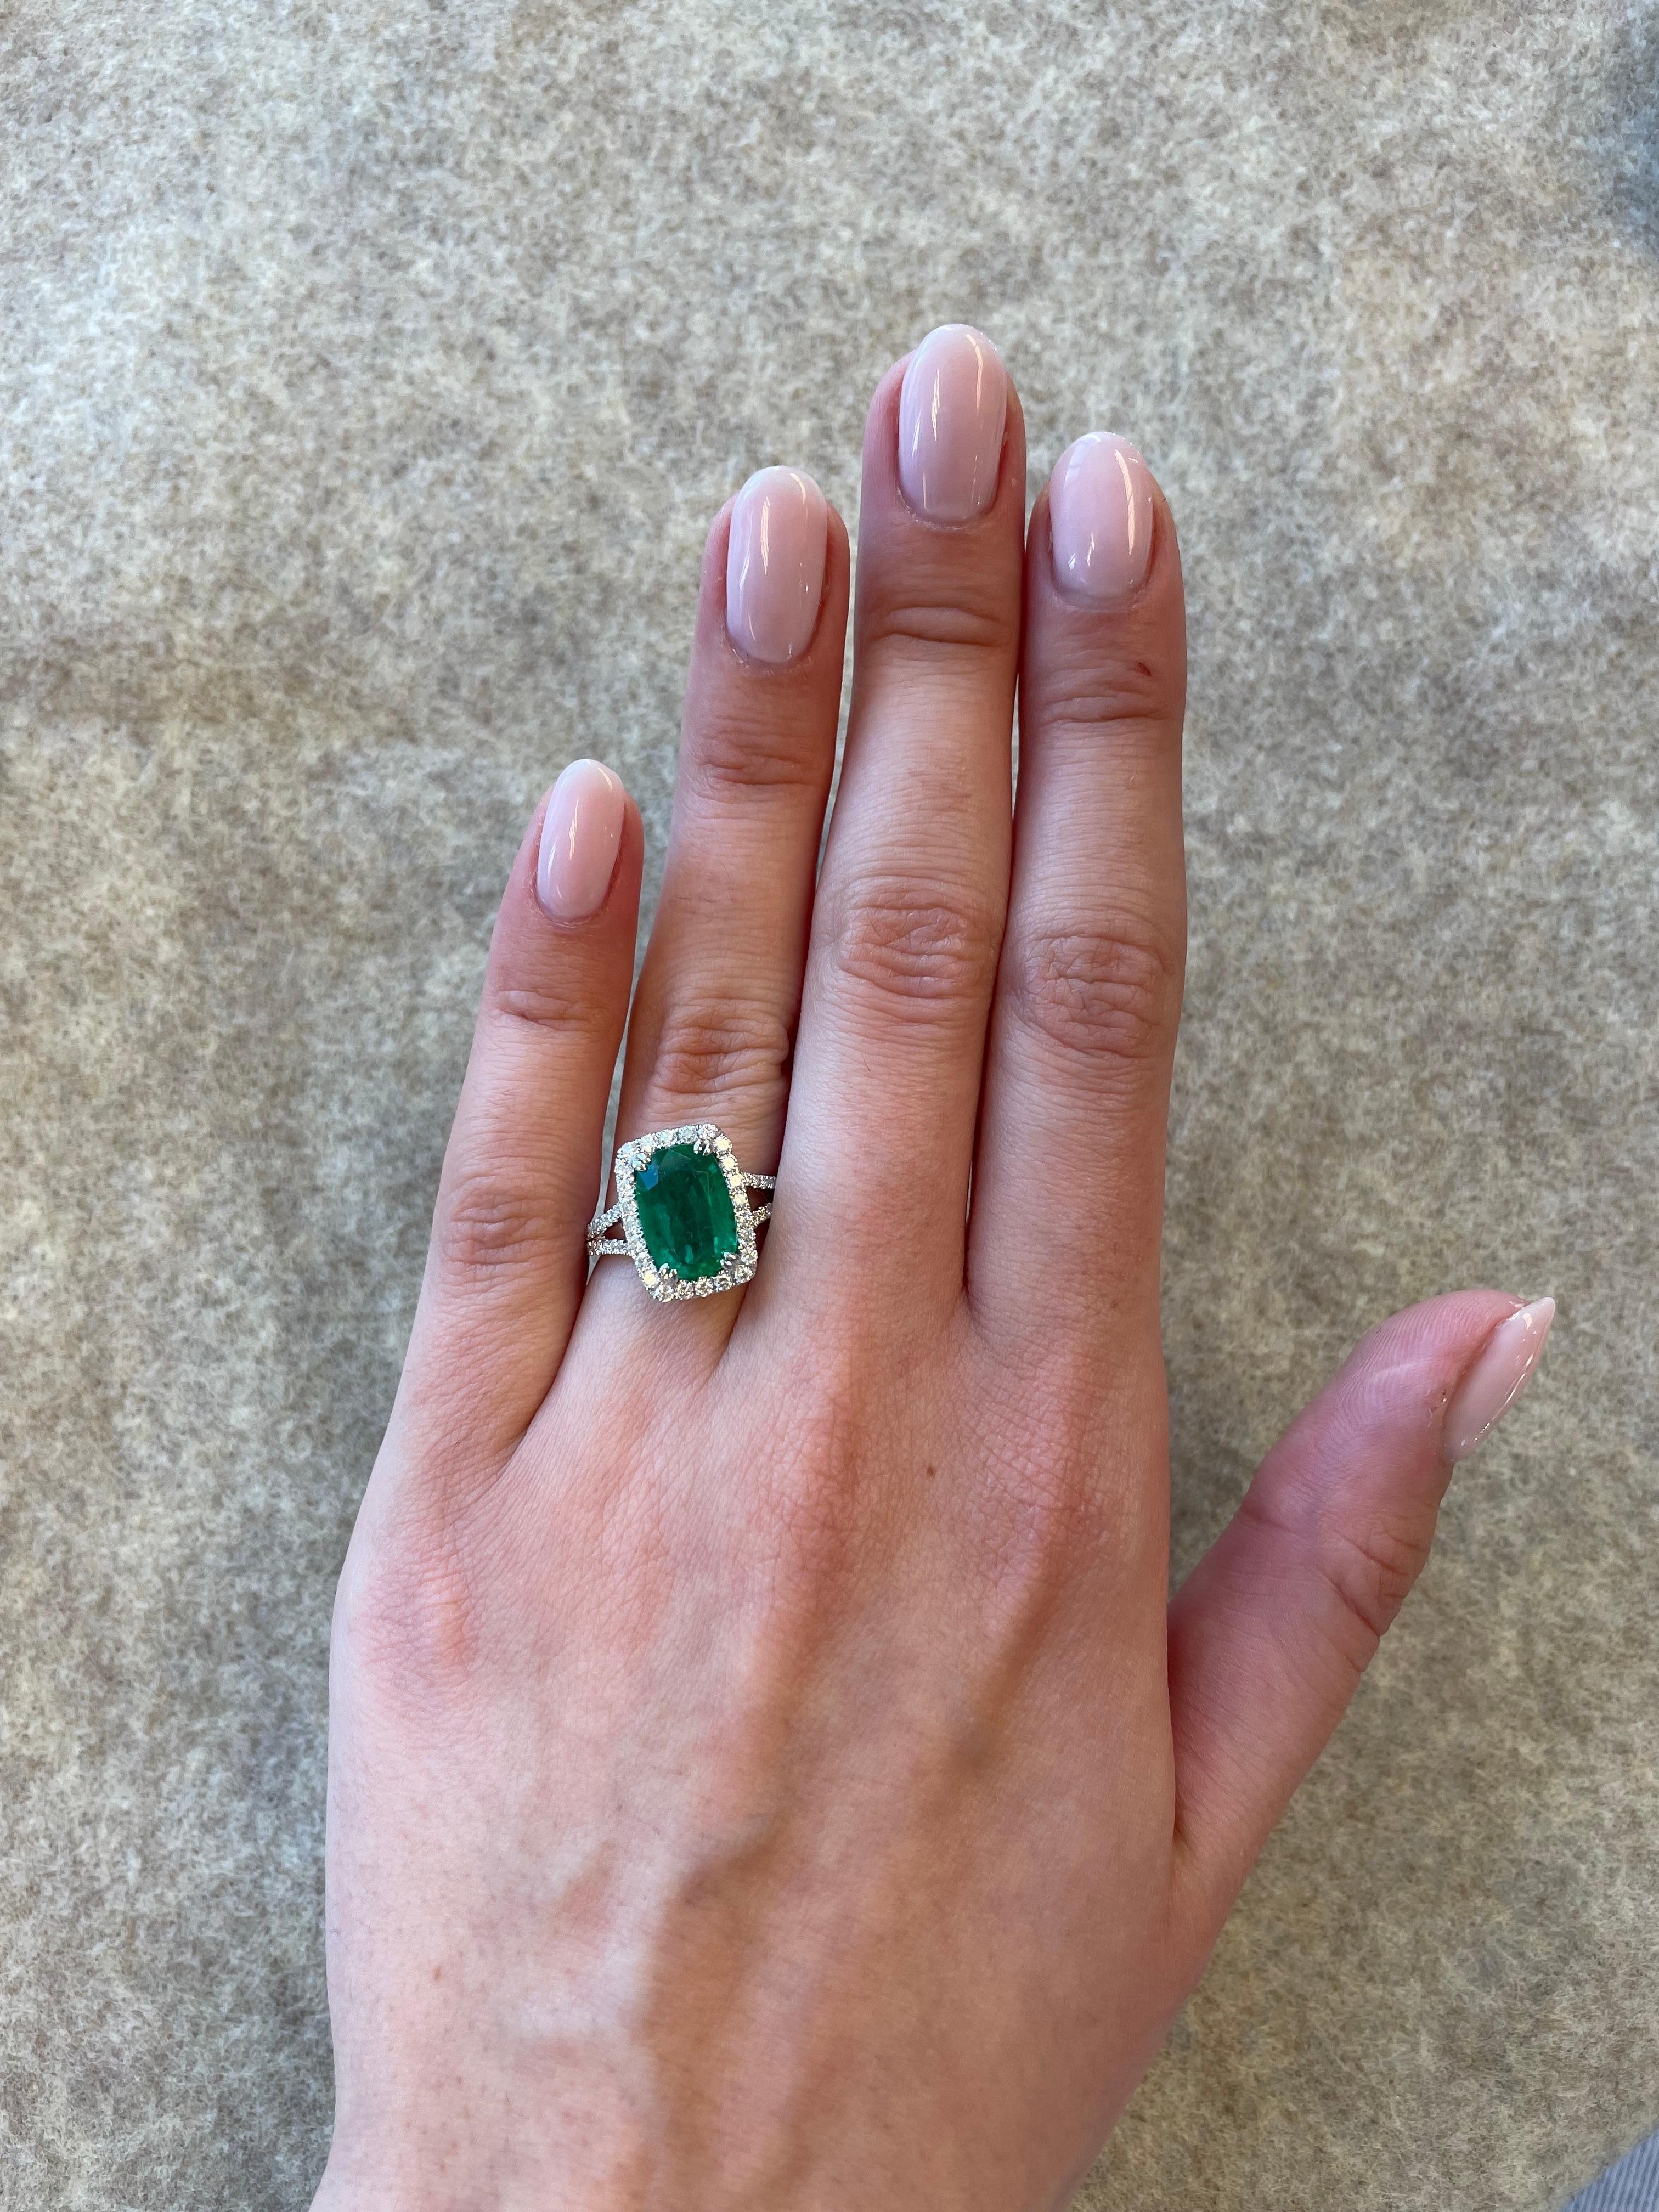 Stunning emerald and diamond halo ring with split shank.
3.16 carats total gemstone weight.
2.48 carat mixed cut emerald (hybrid cut between an oval cut and cushion cut). Complimented by 80 round brilliant diamonds, 0.68 carats. Approximately G/H